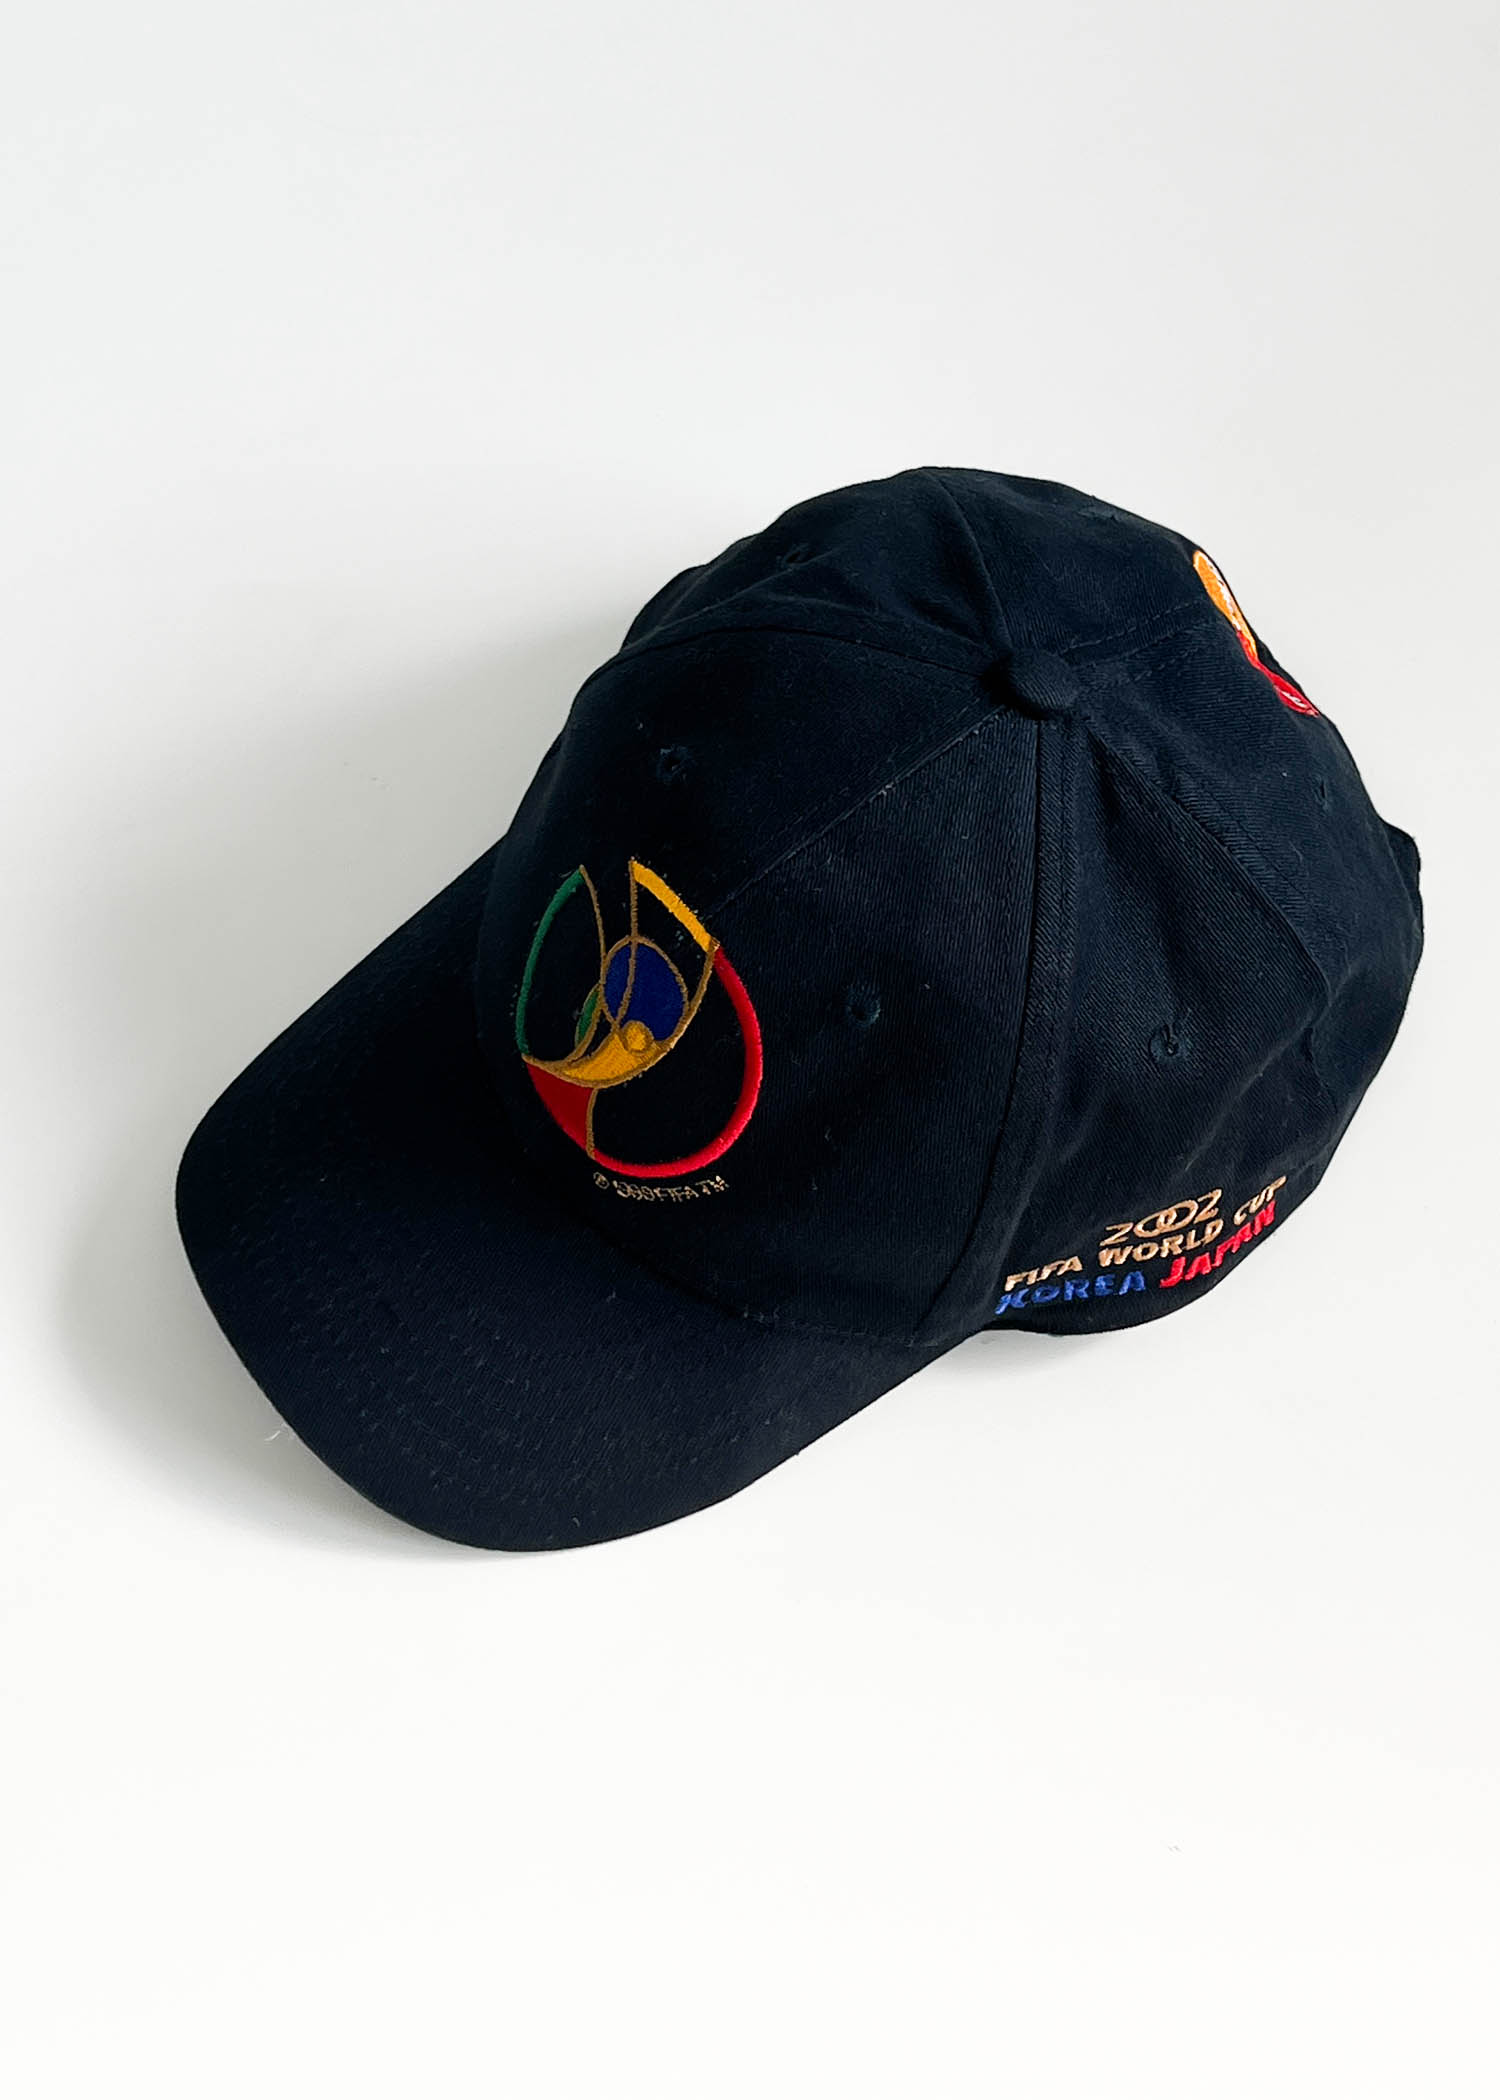 2002 FIFA worldcup official cap